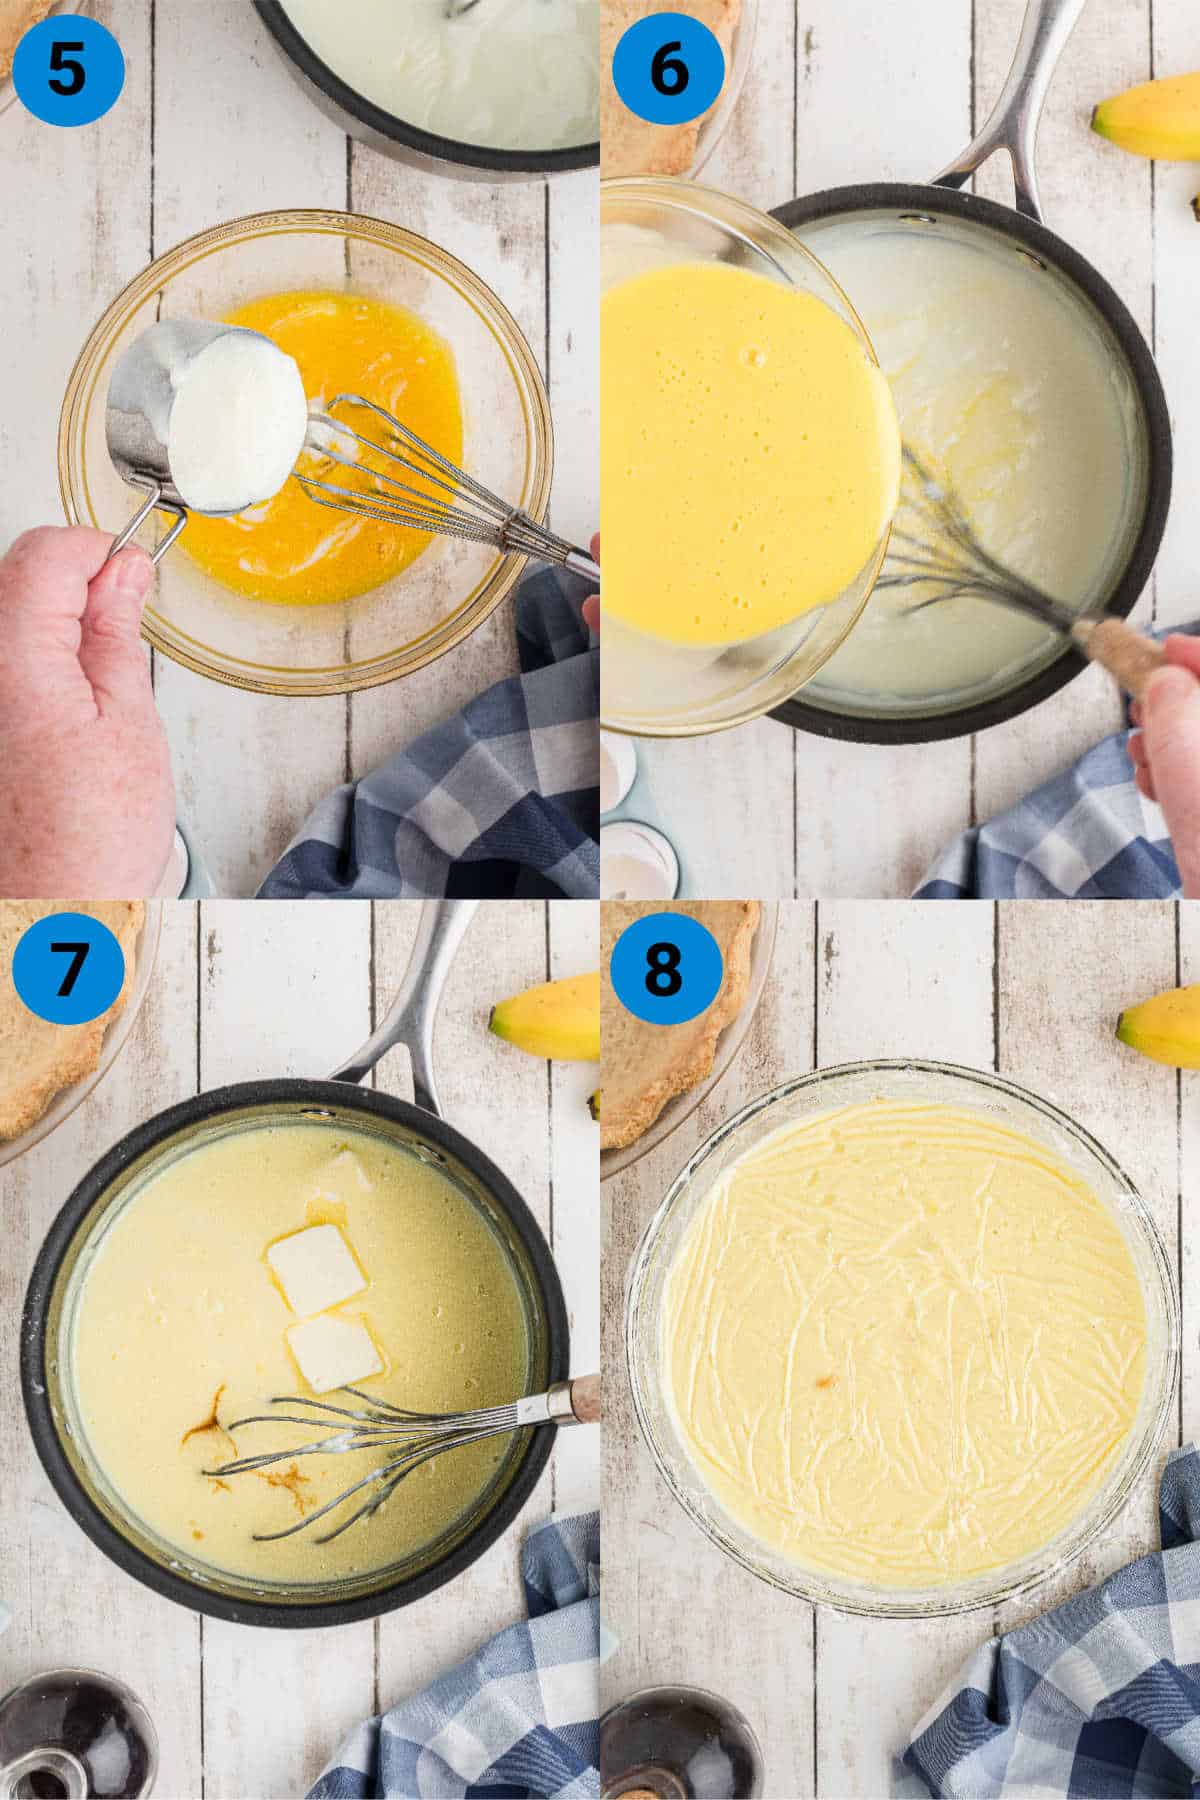 A collage of four images showing how to make an easy banana cream pie, steps 5 through 8.